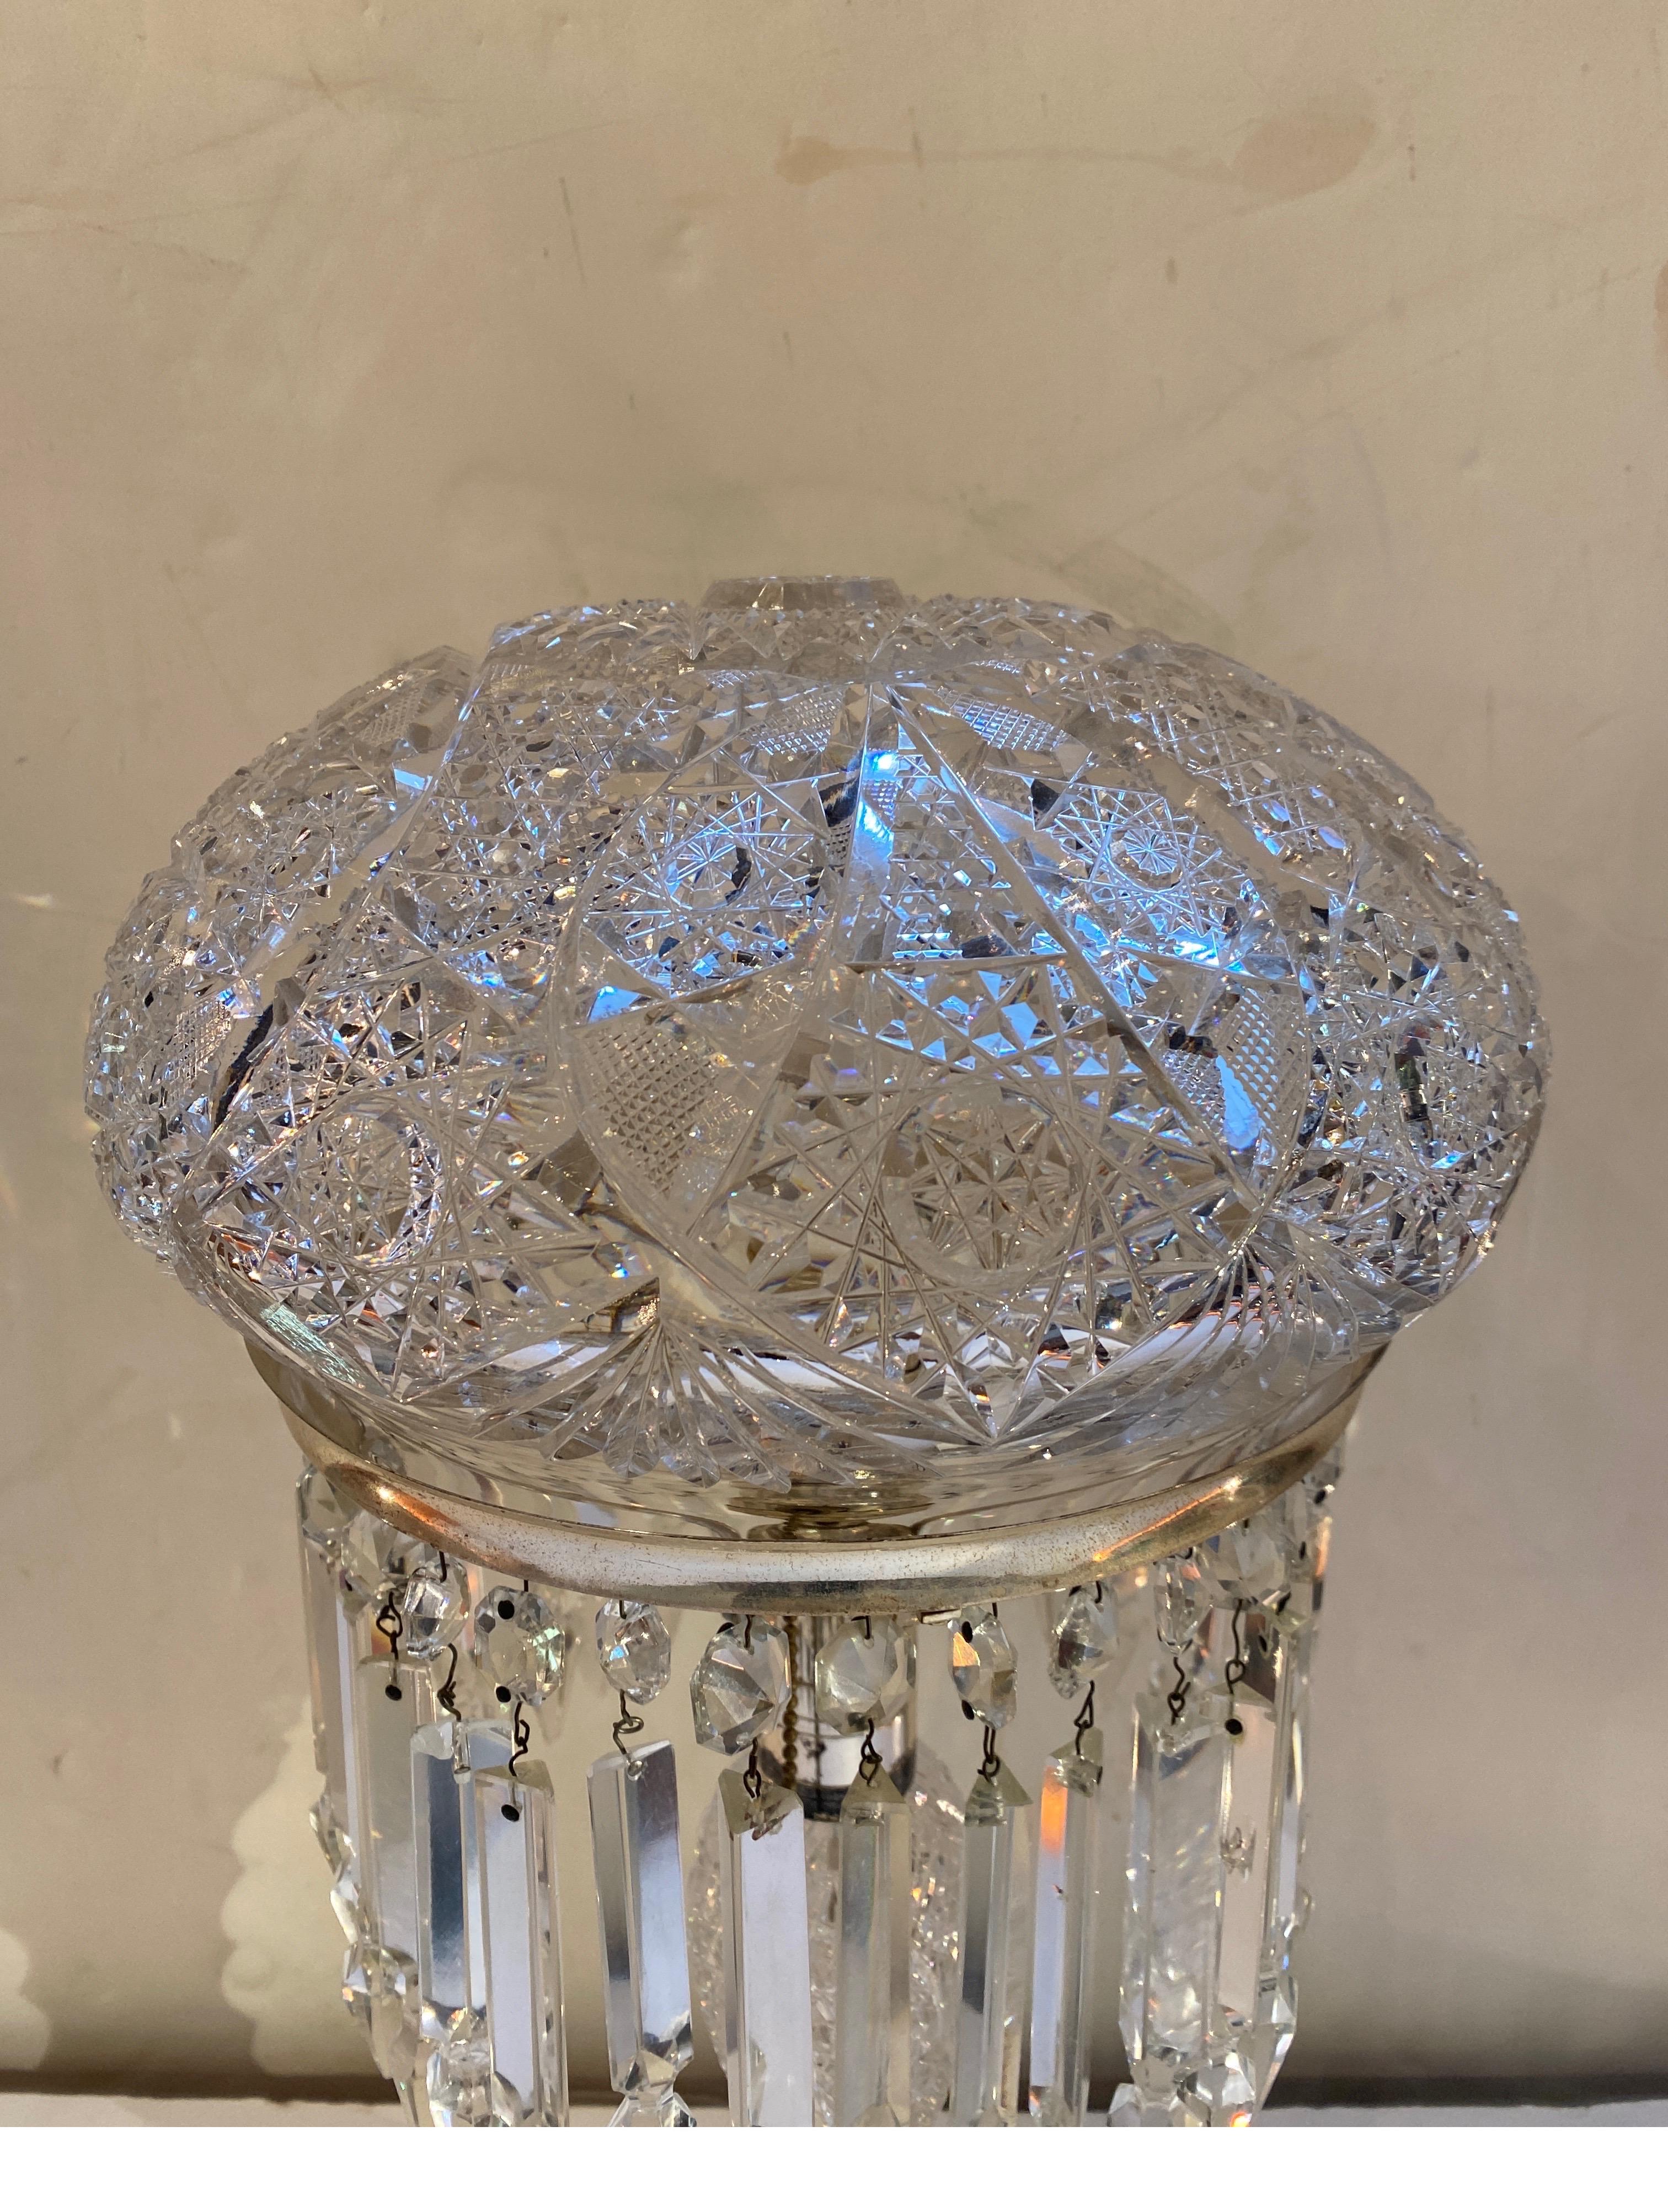 Elaborately cut American Brilliant glass table lamp. The base and shad are original with all around spear hanging crystals. The mount is silver plate and take a standard light bulb. The is 100% all hand cut and polished by a master cutter on a wheel.